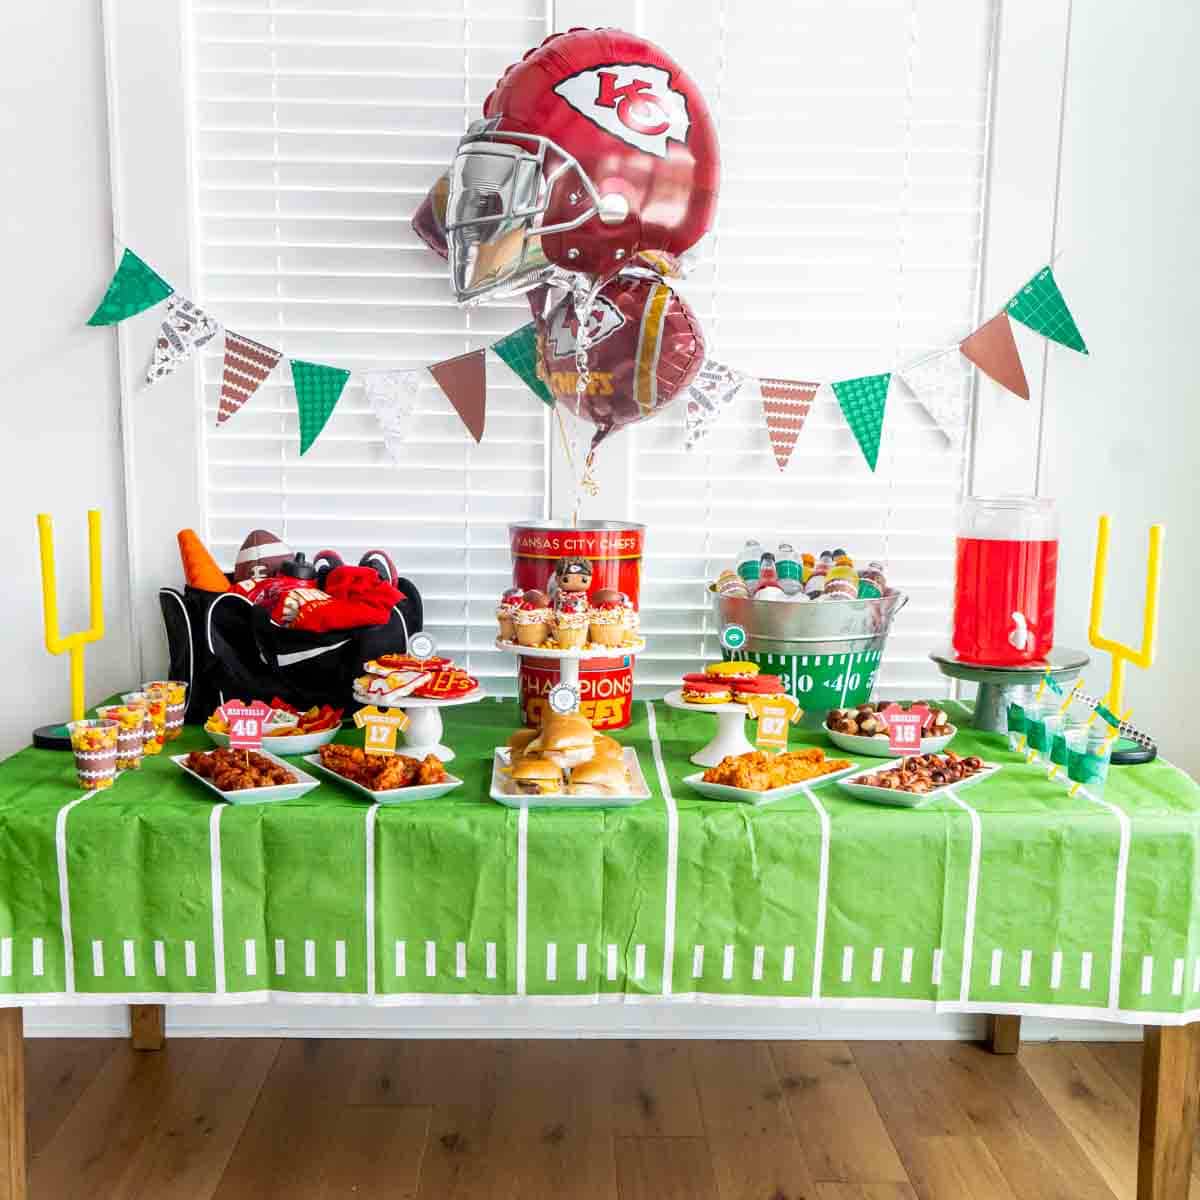 Football party table